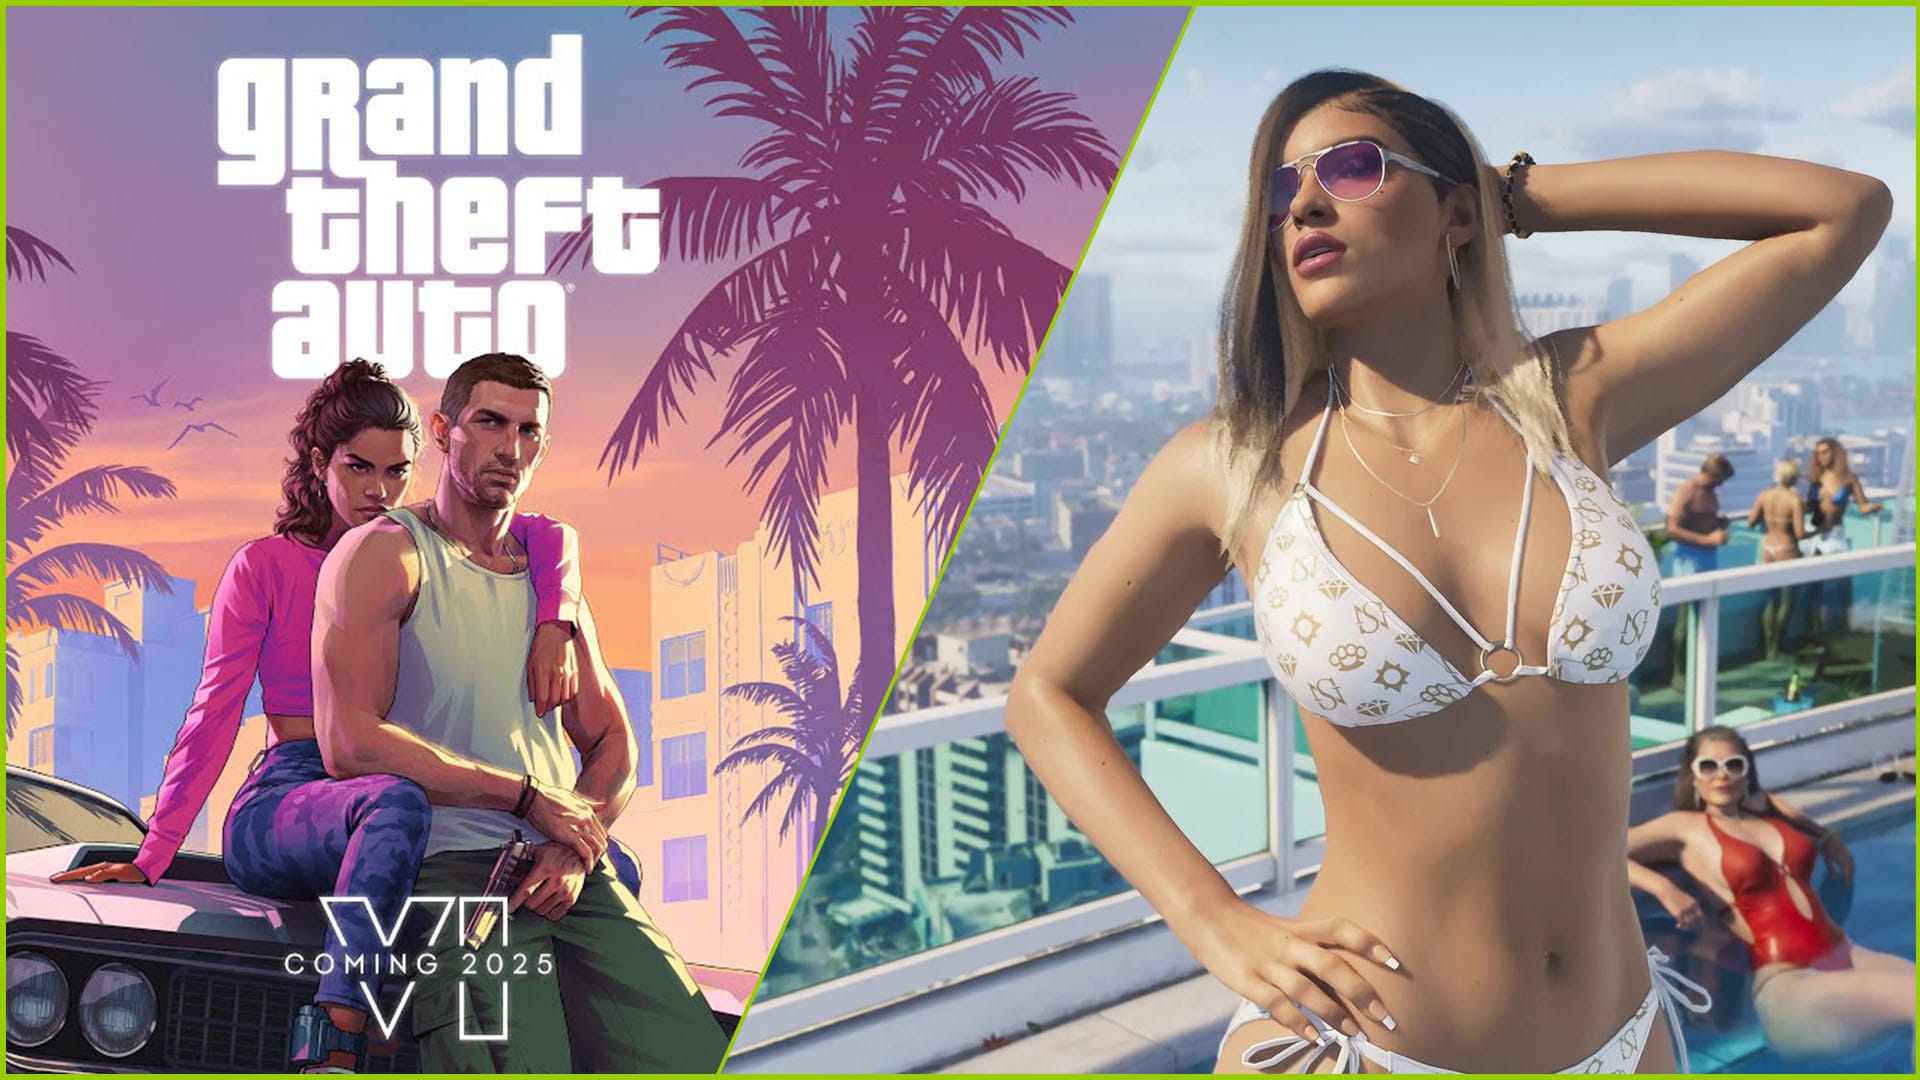 Grand Theft Auto VI trailer launch sets new 24-hour record on